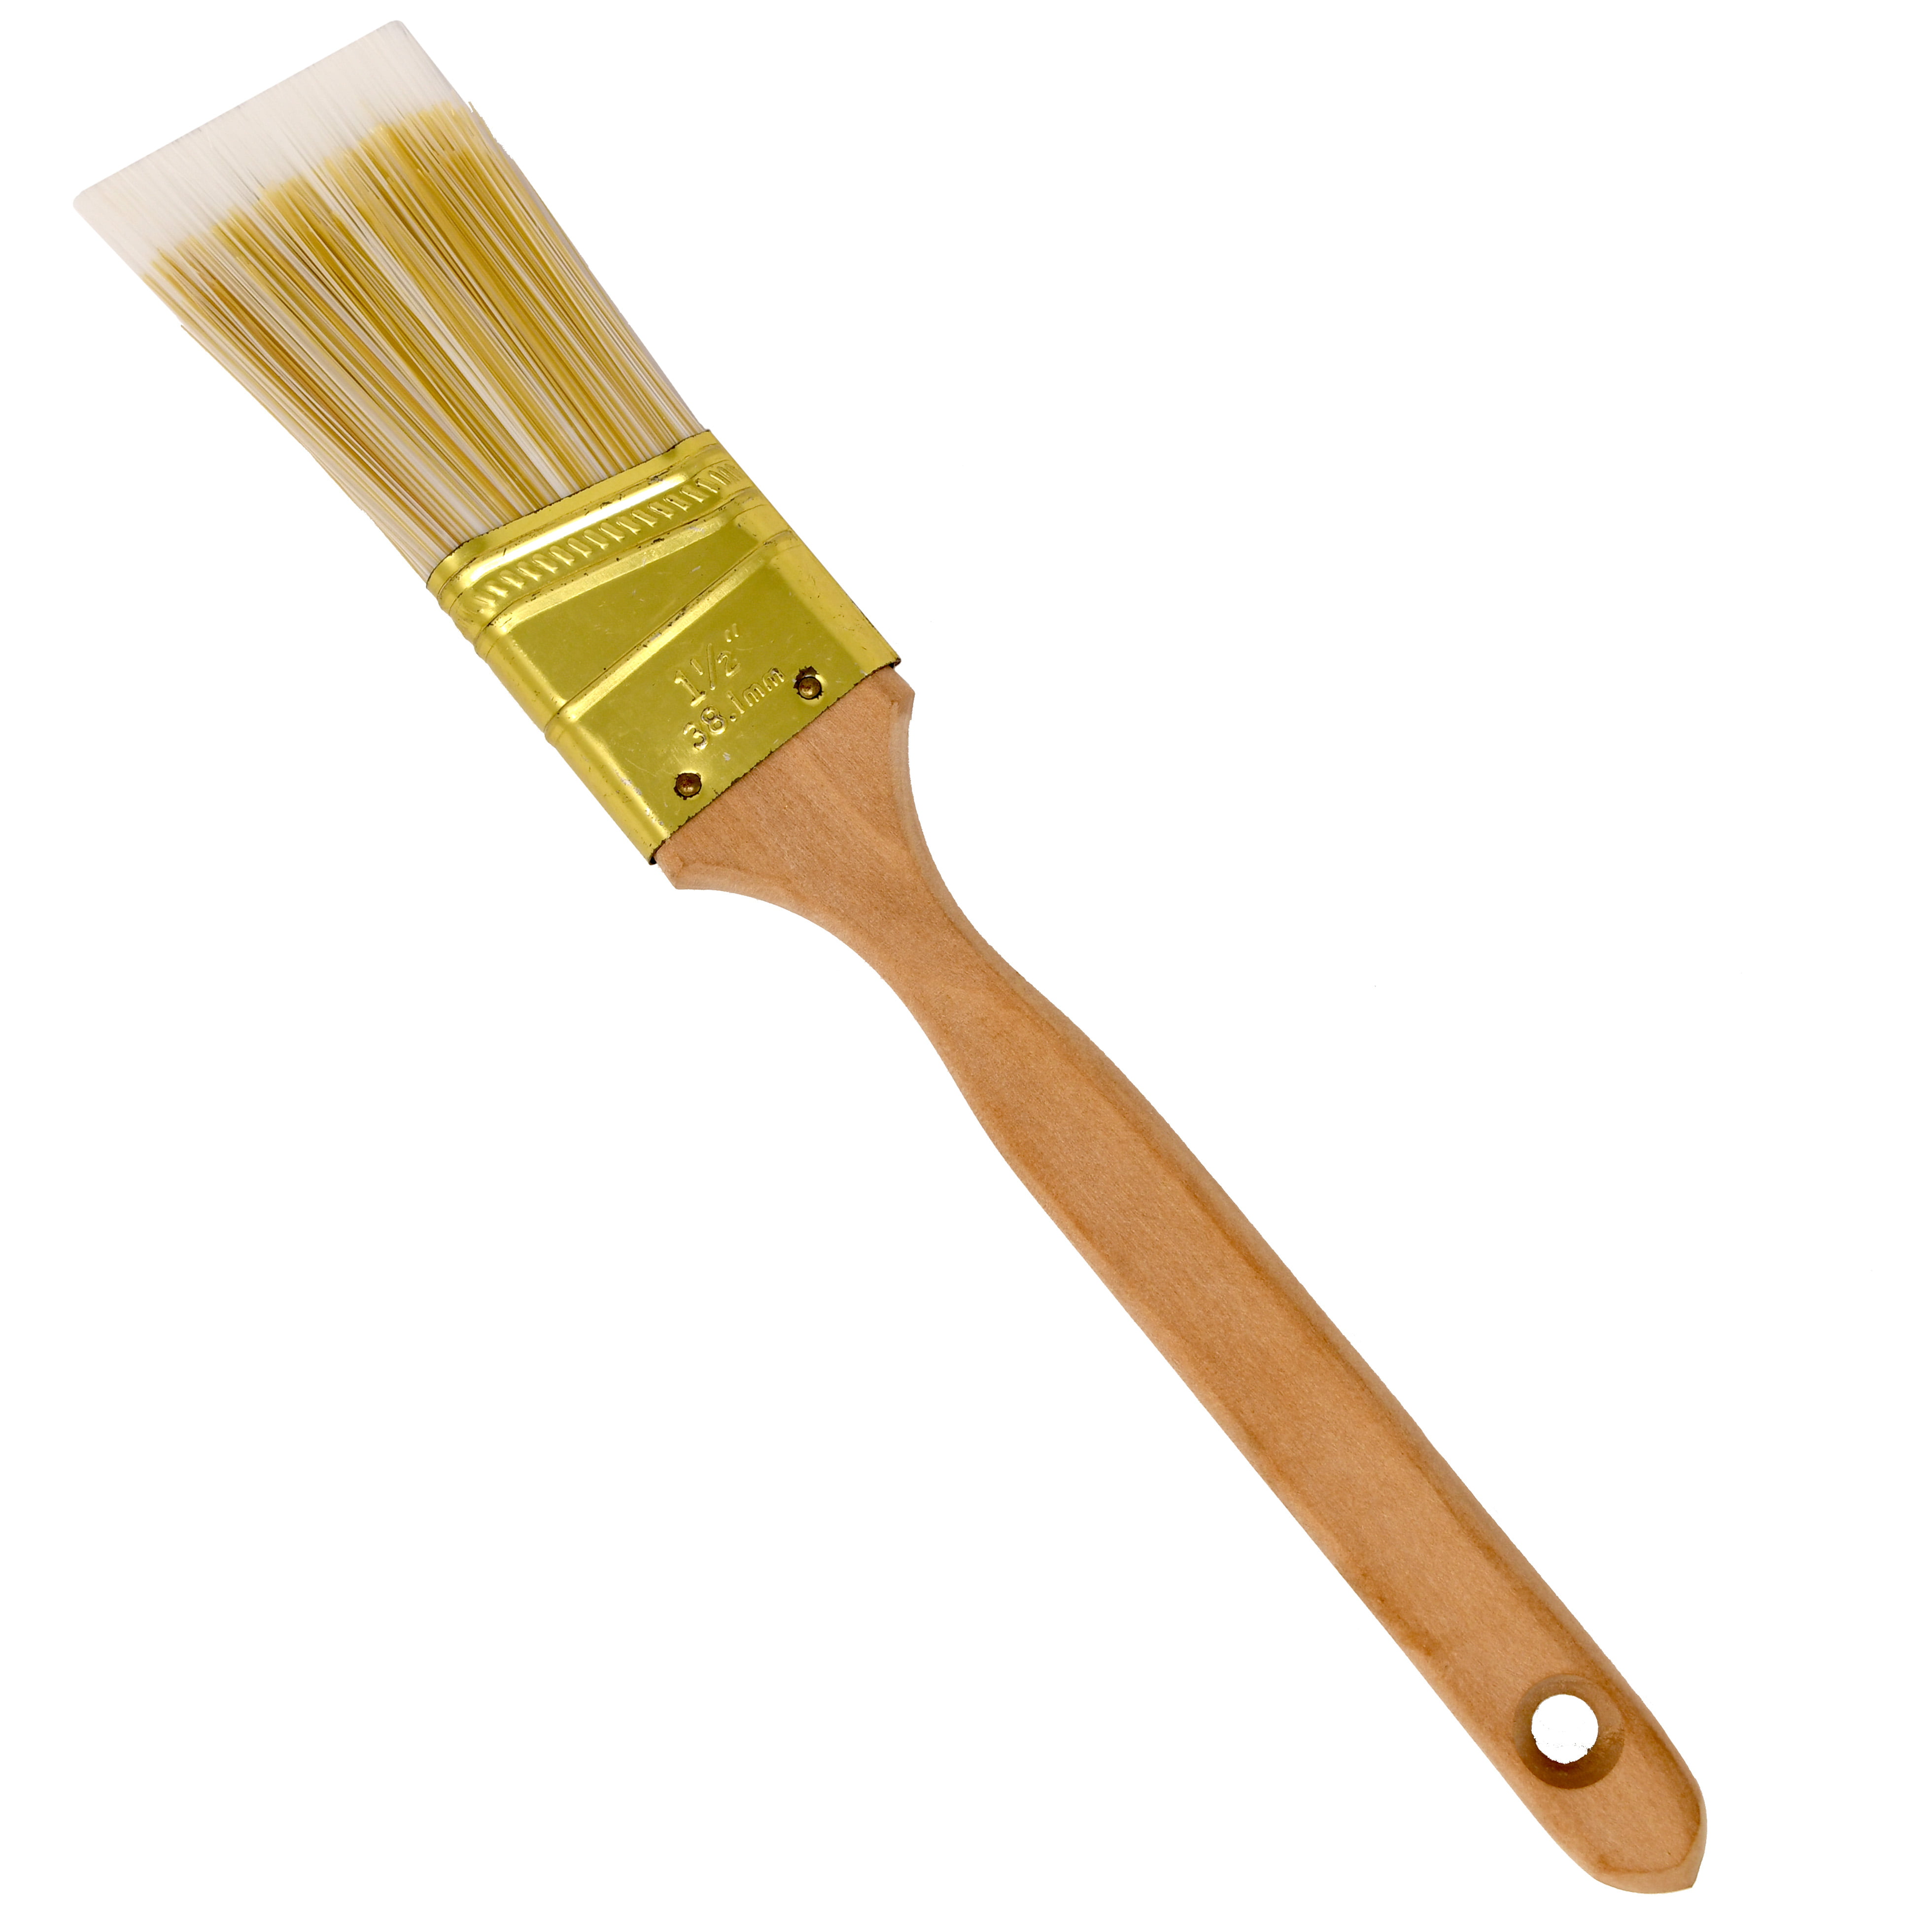 White,Limited Edition Wooster Brush Q3108-1 Softip Paintbrush 1-Inch